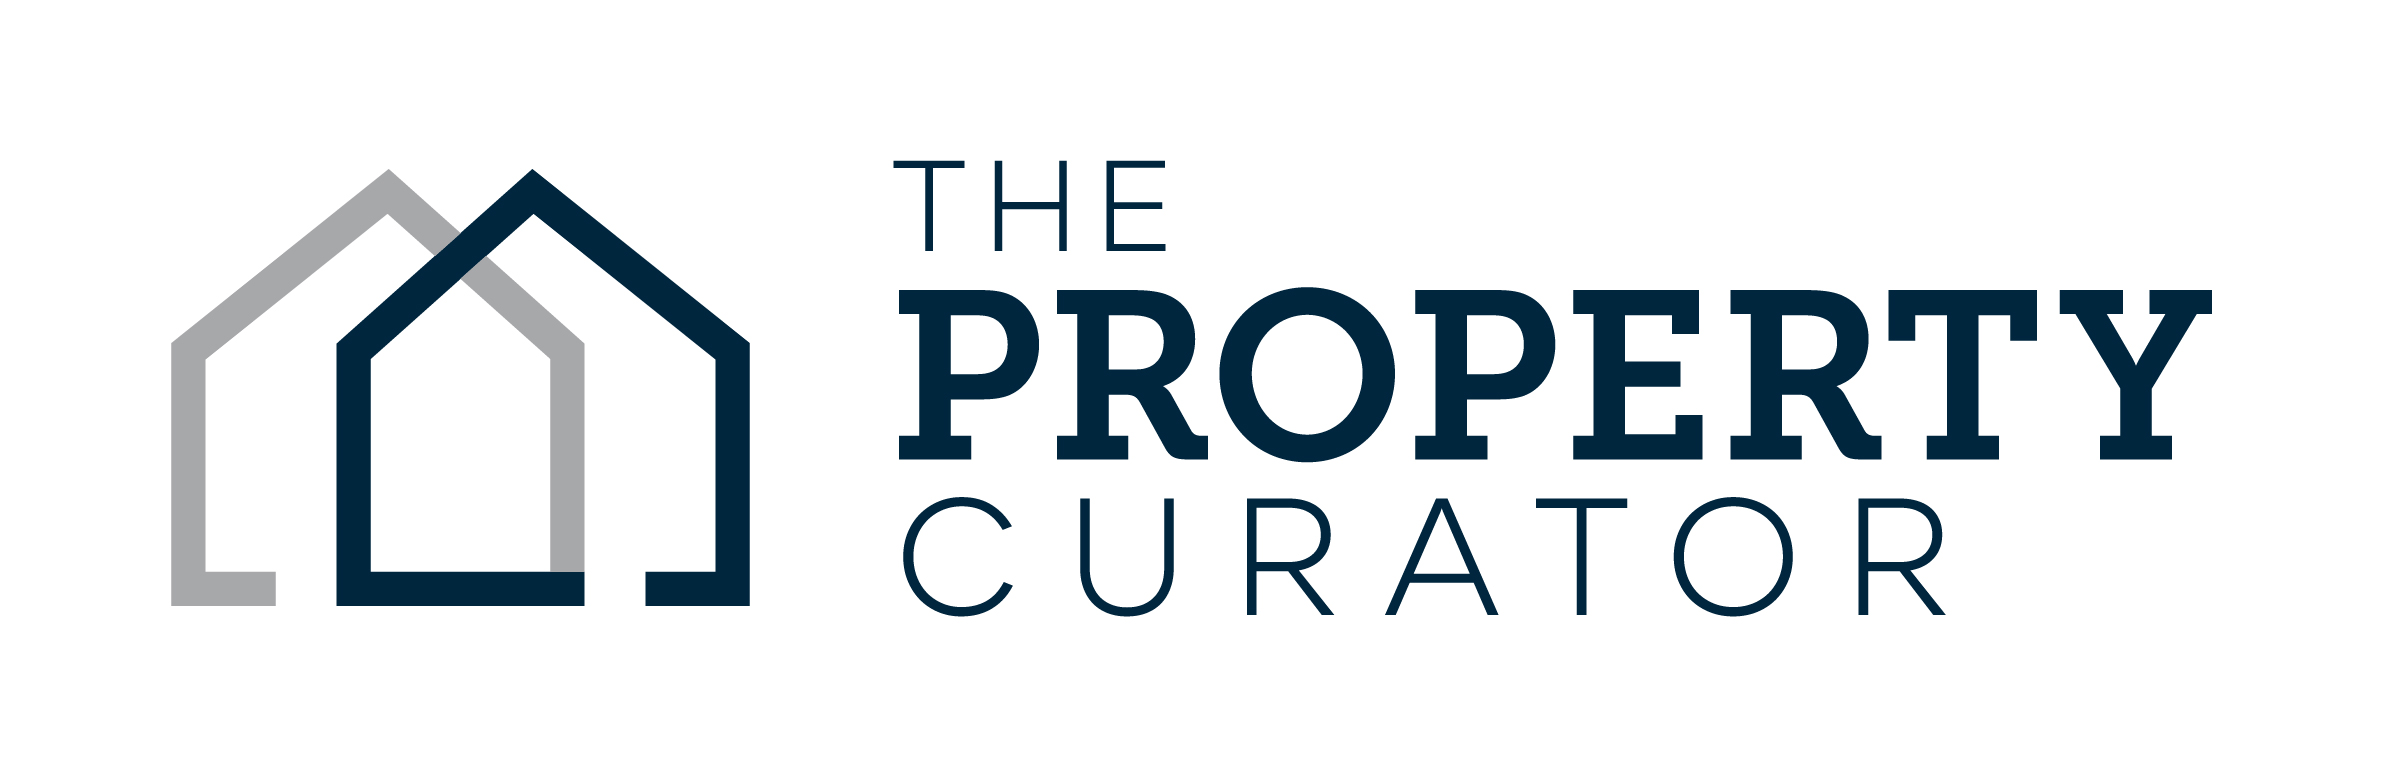 The Property Curator